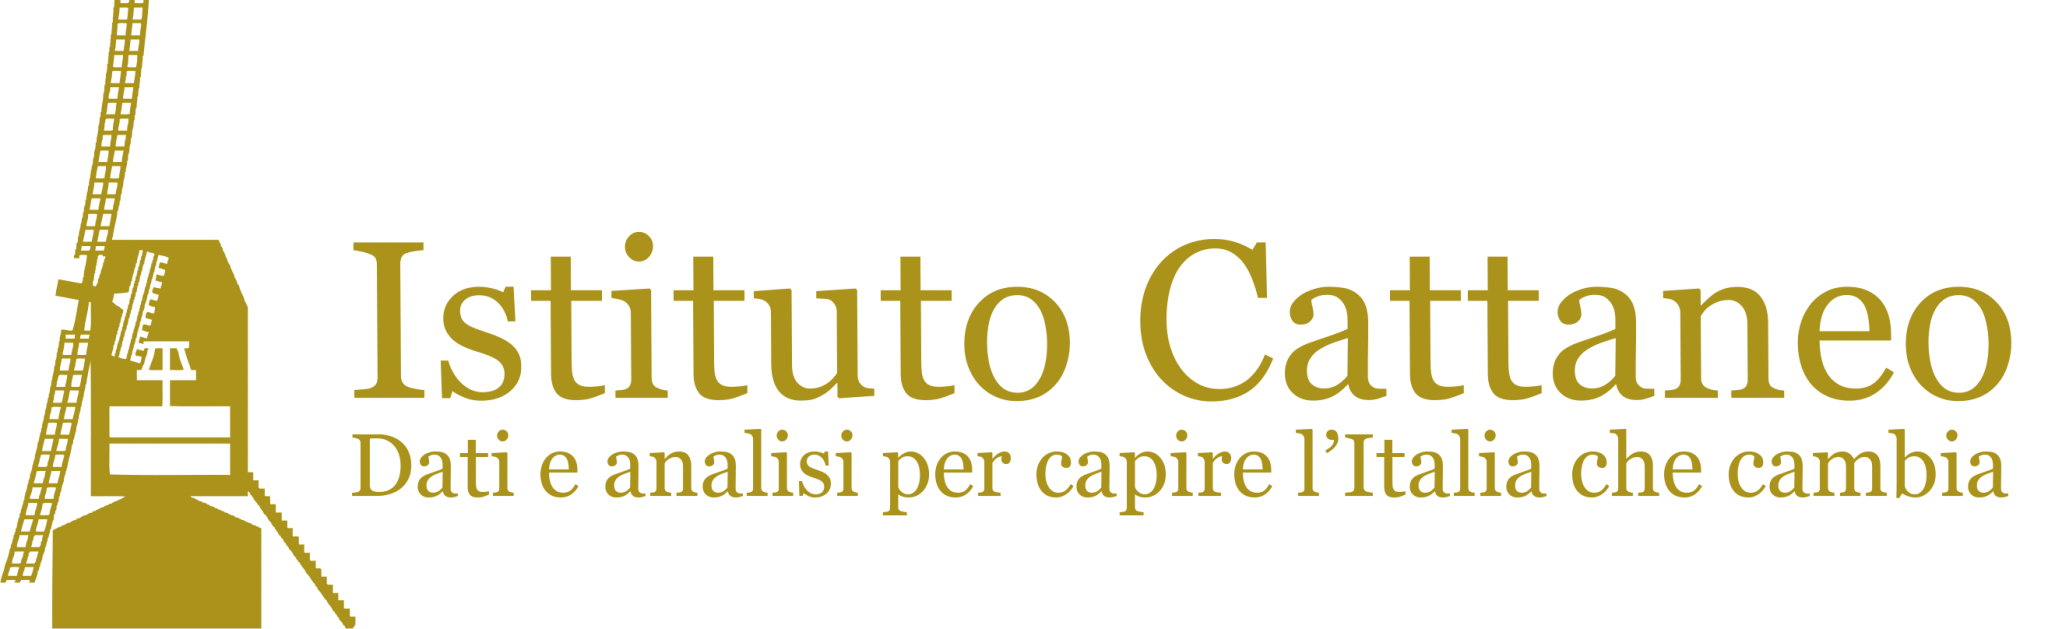 ISTITUTO CATTANEO | Marchesini Group